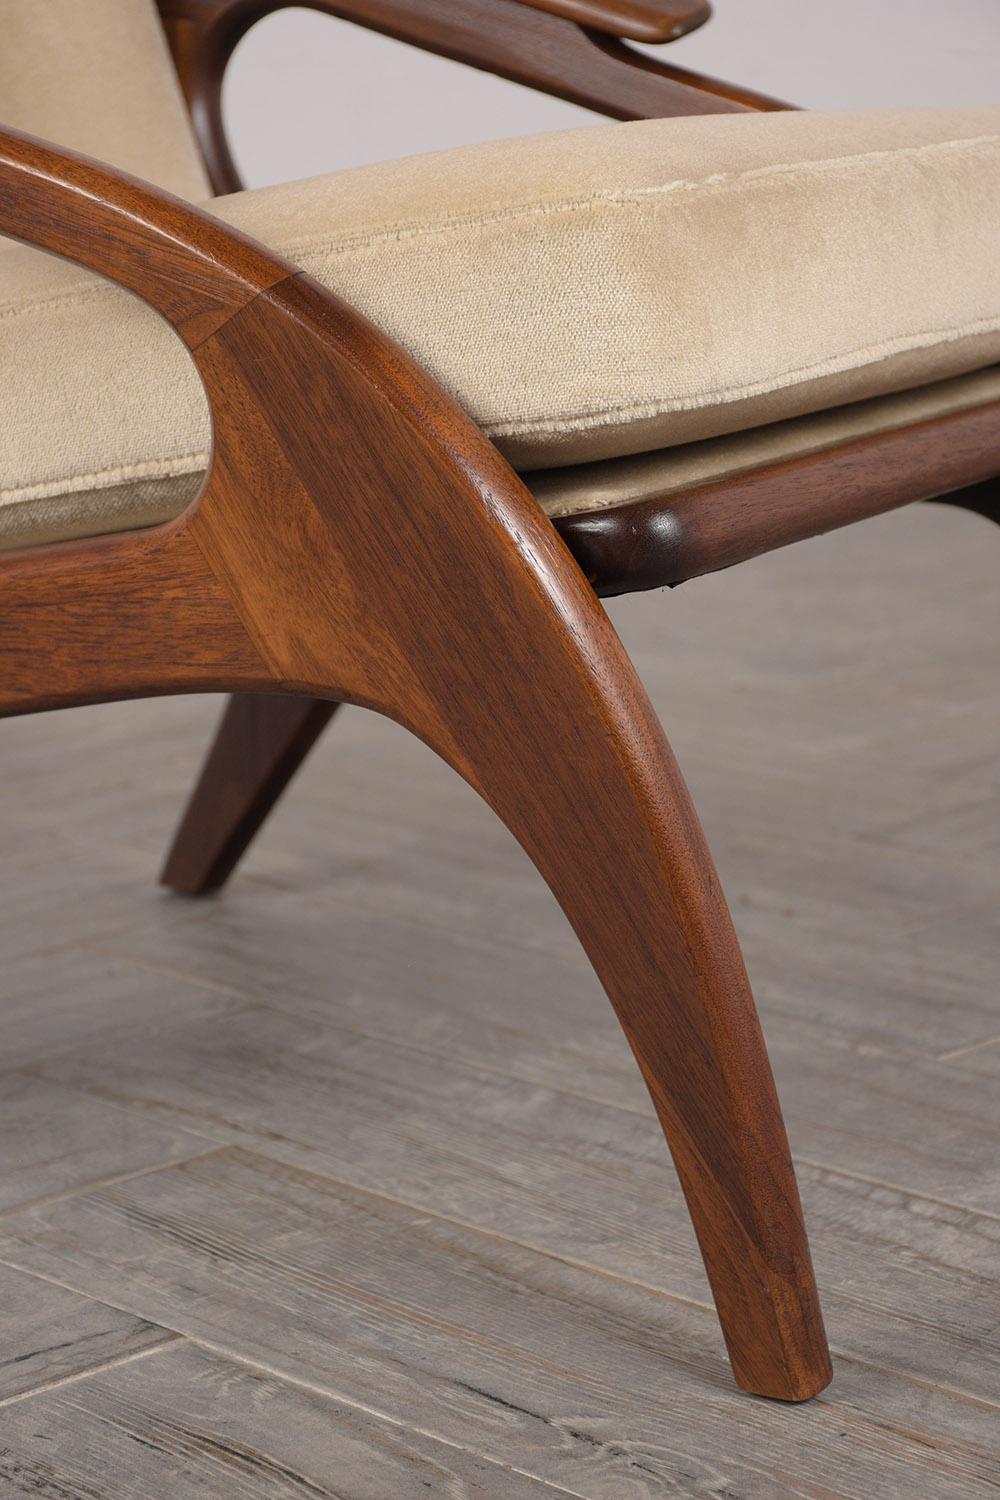 Carved Adrian Pearsall Lounge Chair for Craft Associates 